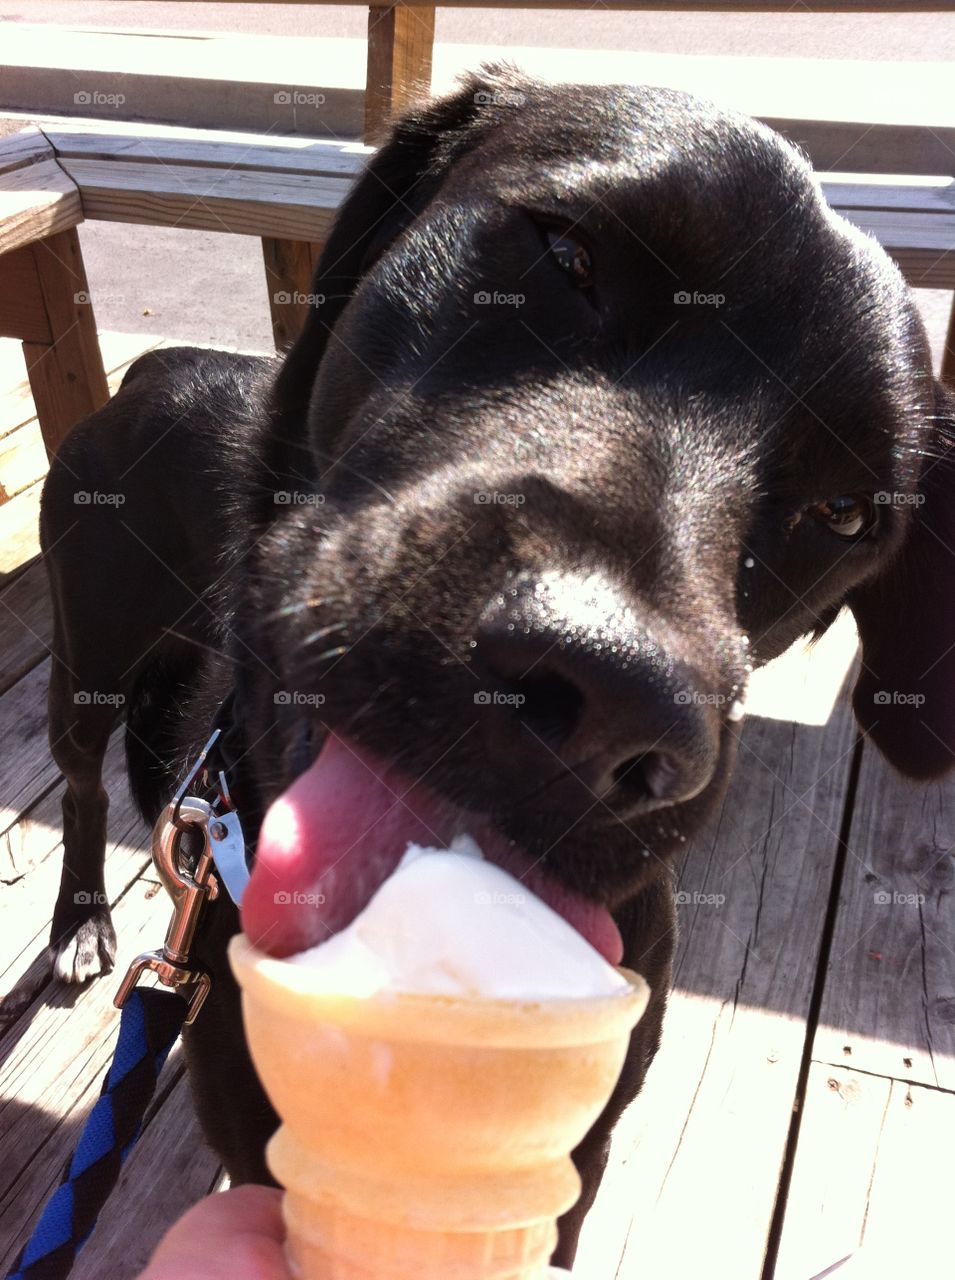 Sweet Treat. Took my puppy to get an ice cream on a hot summer day!